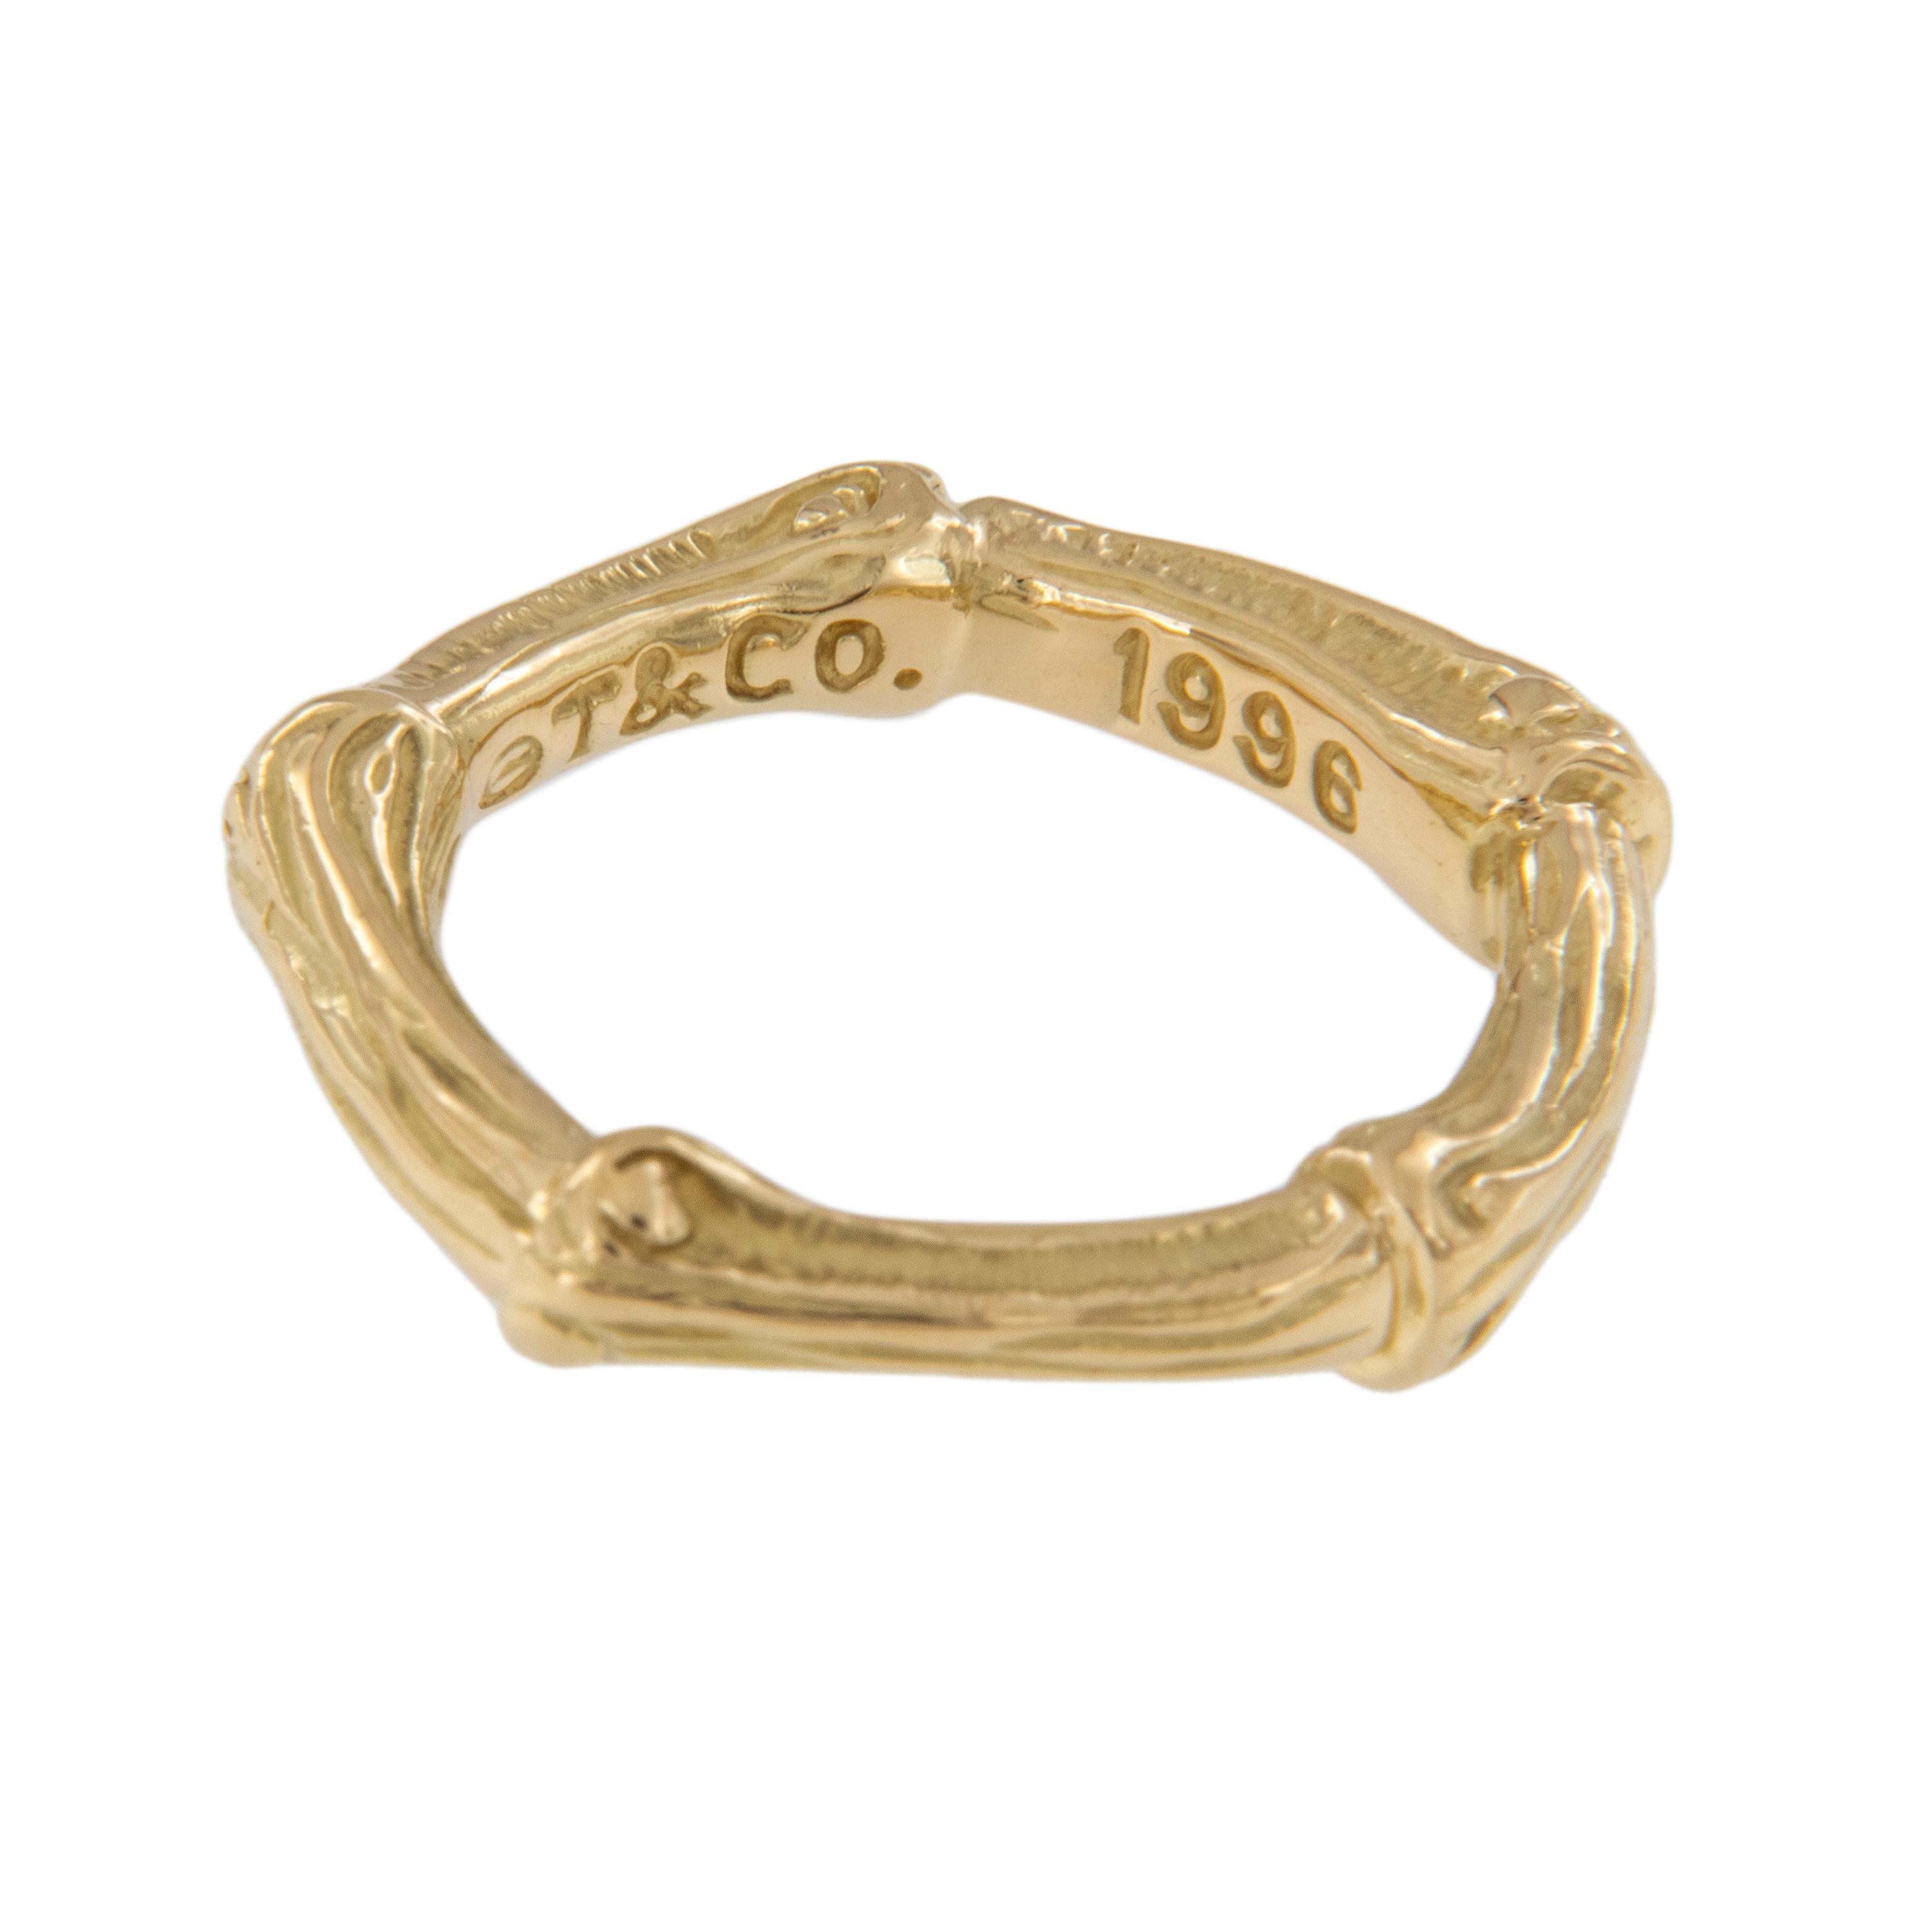 Rare Bamboo Tiffany & Co 18 karat yellow gold band ring. Iconic and timeless bamboo motif looks lovely on everyone. Wear a piece of fashionable history. Ring is a size 5.25. Stamped T & Co, 1996. 3 
 RINGS AVAILABLE PRICED